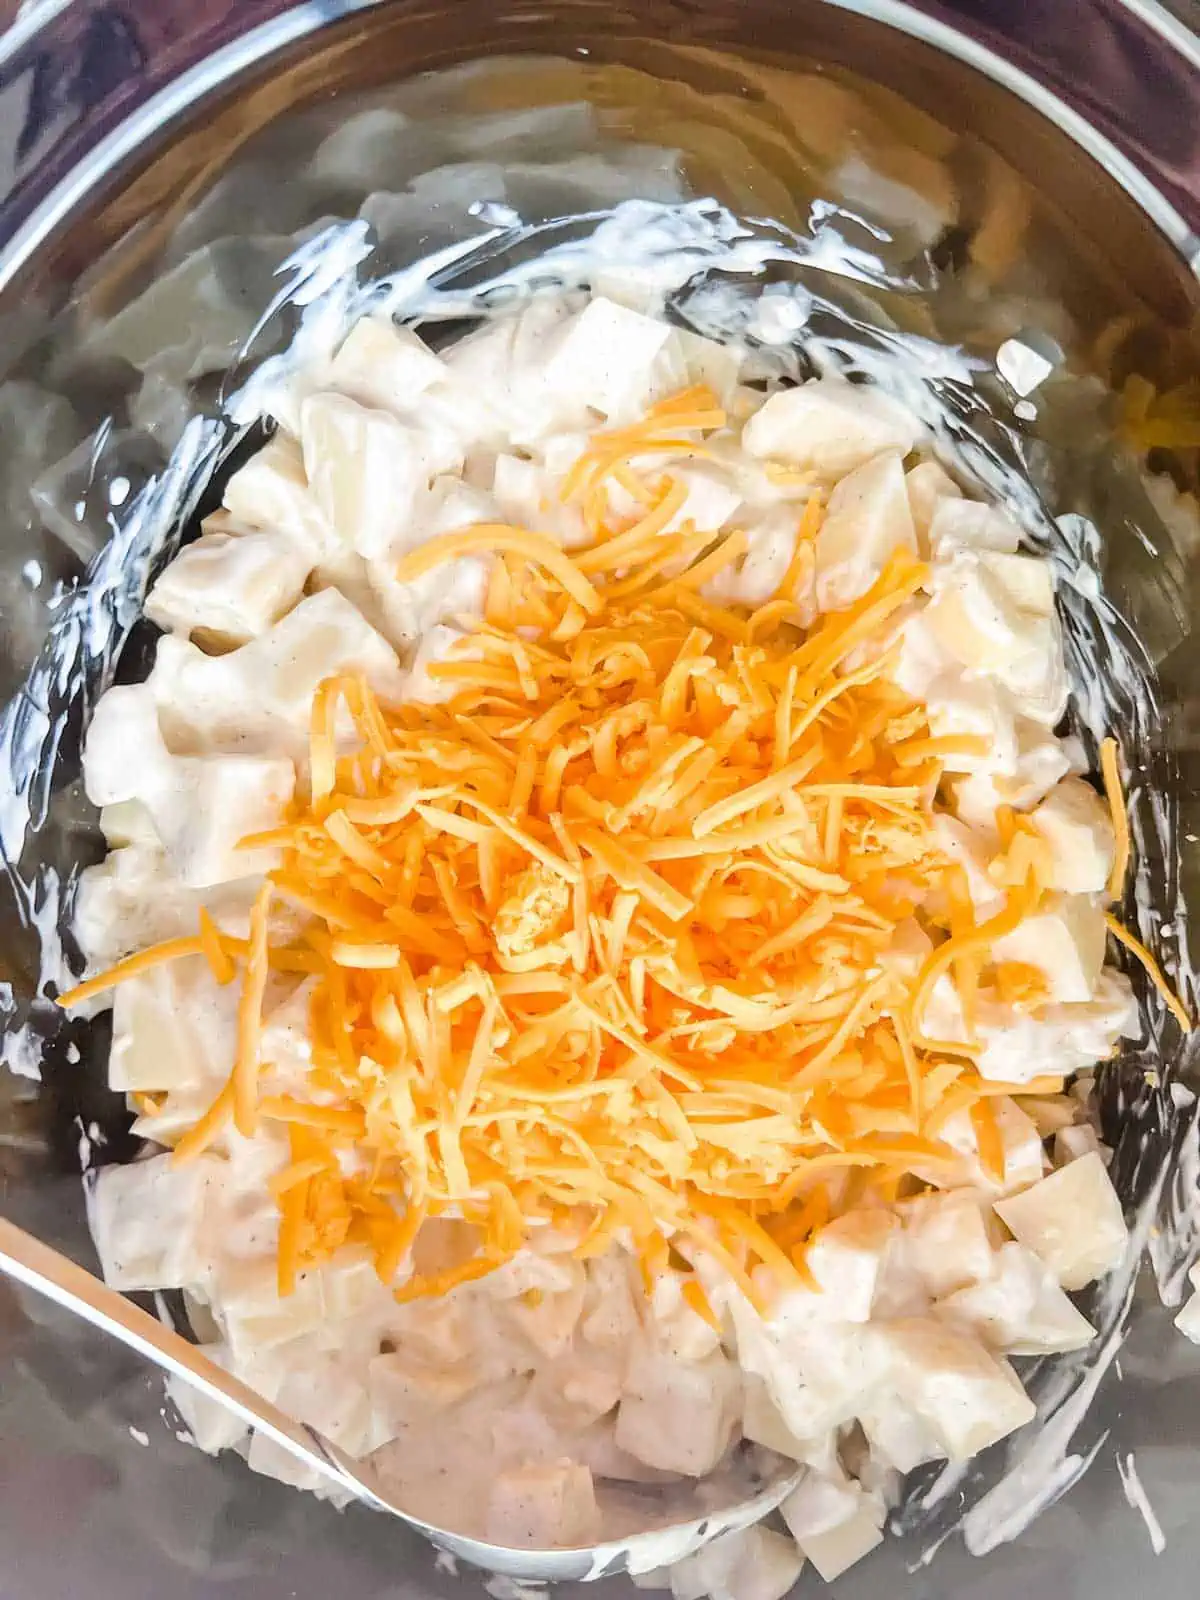 Photo of potatoes with shredded cheddar cheese in a crockpot.